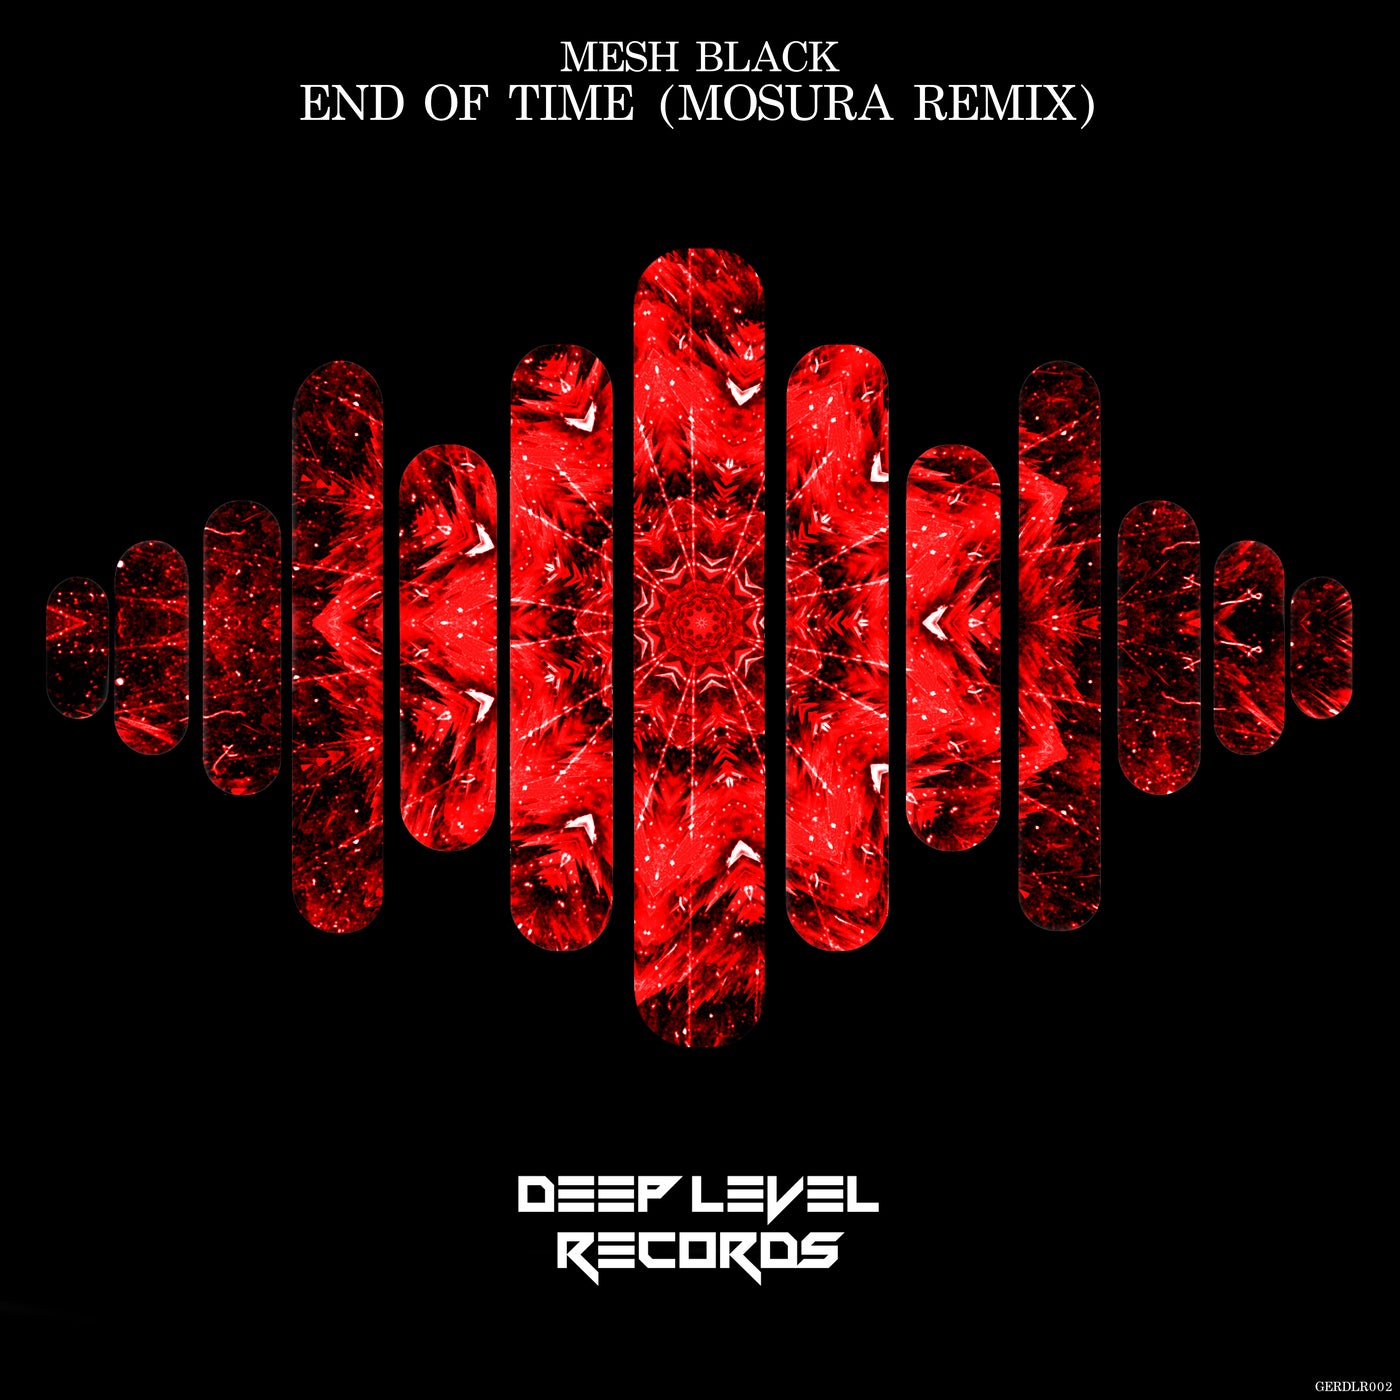 End of Time (Mosura Remix)